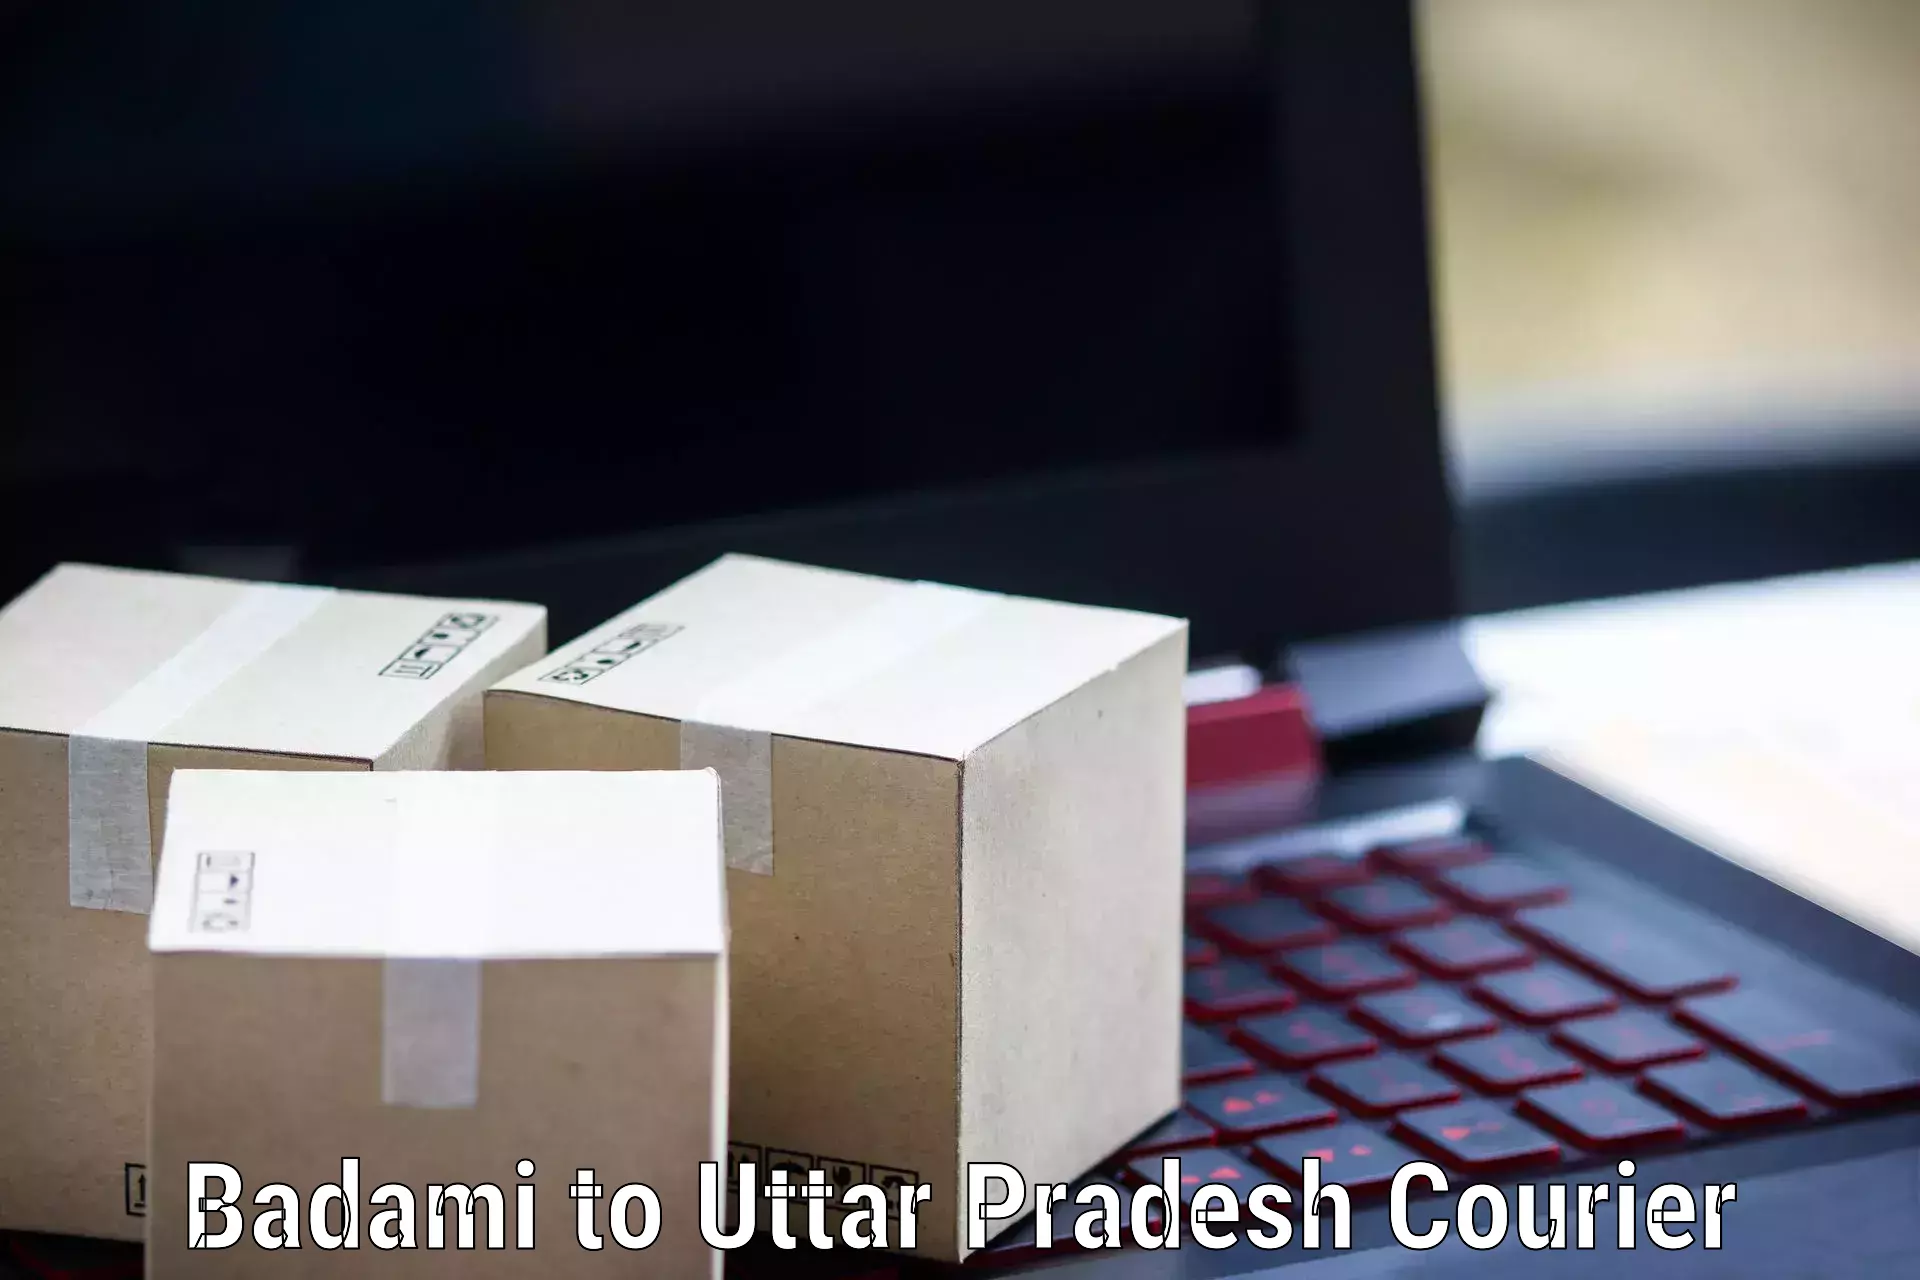 Nationwide parcel services Badami to Allahabad